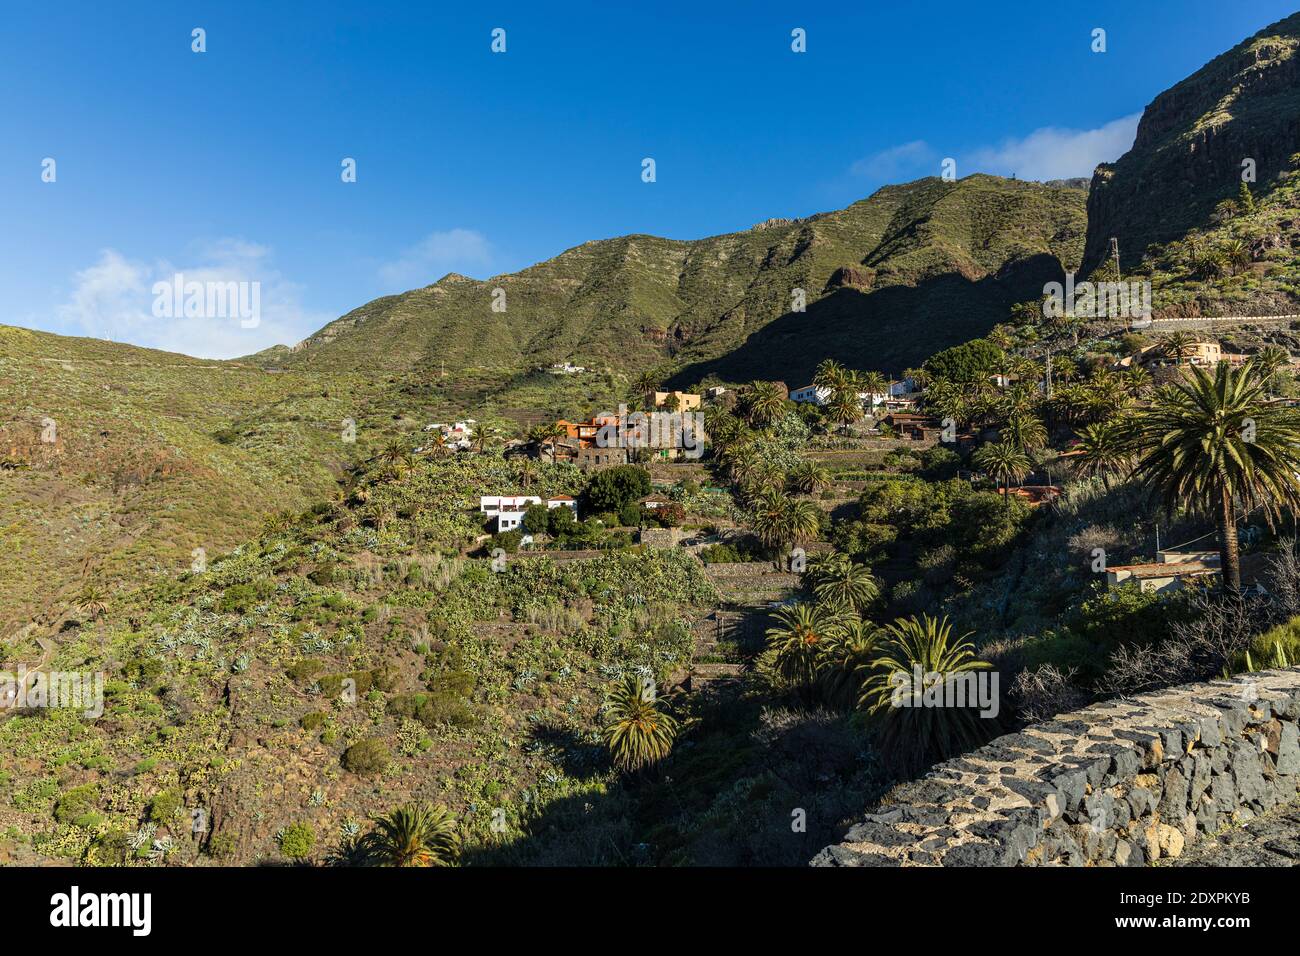 Views into the barranco, gorge and village of Masca, Tenerife, Canary Islands, Spain Stock Photo